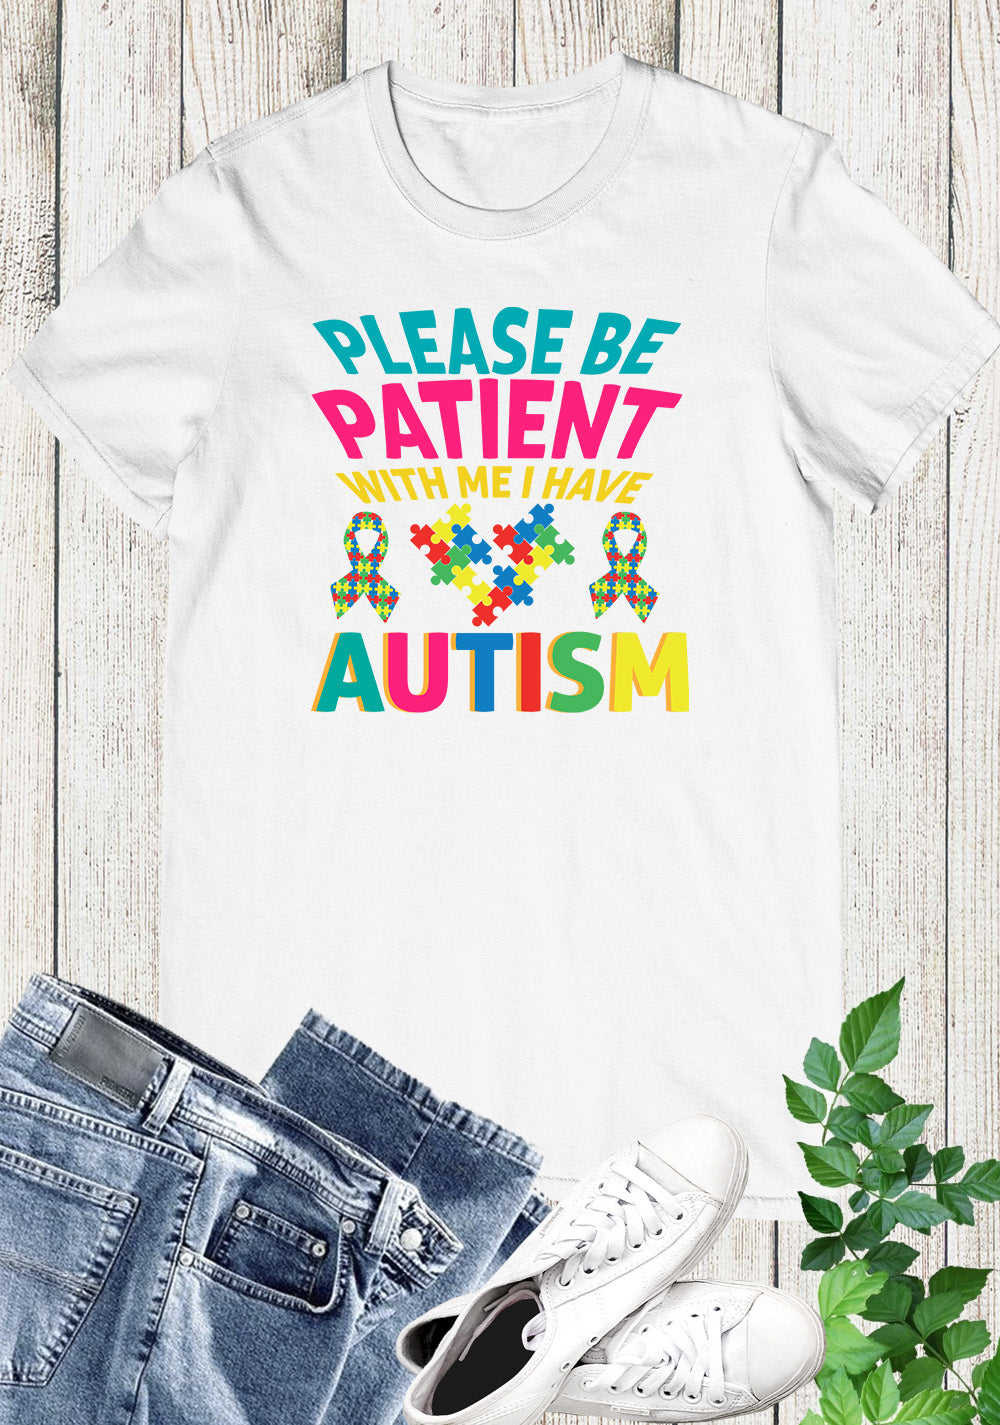 Please Be Patient with me I Have Autism Shirt